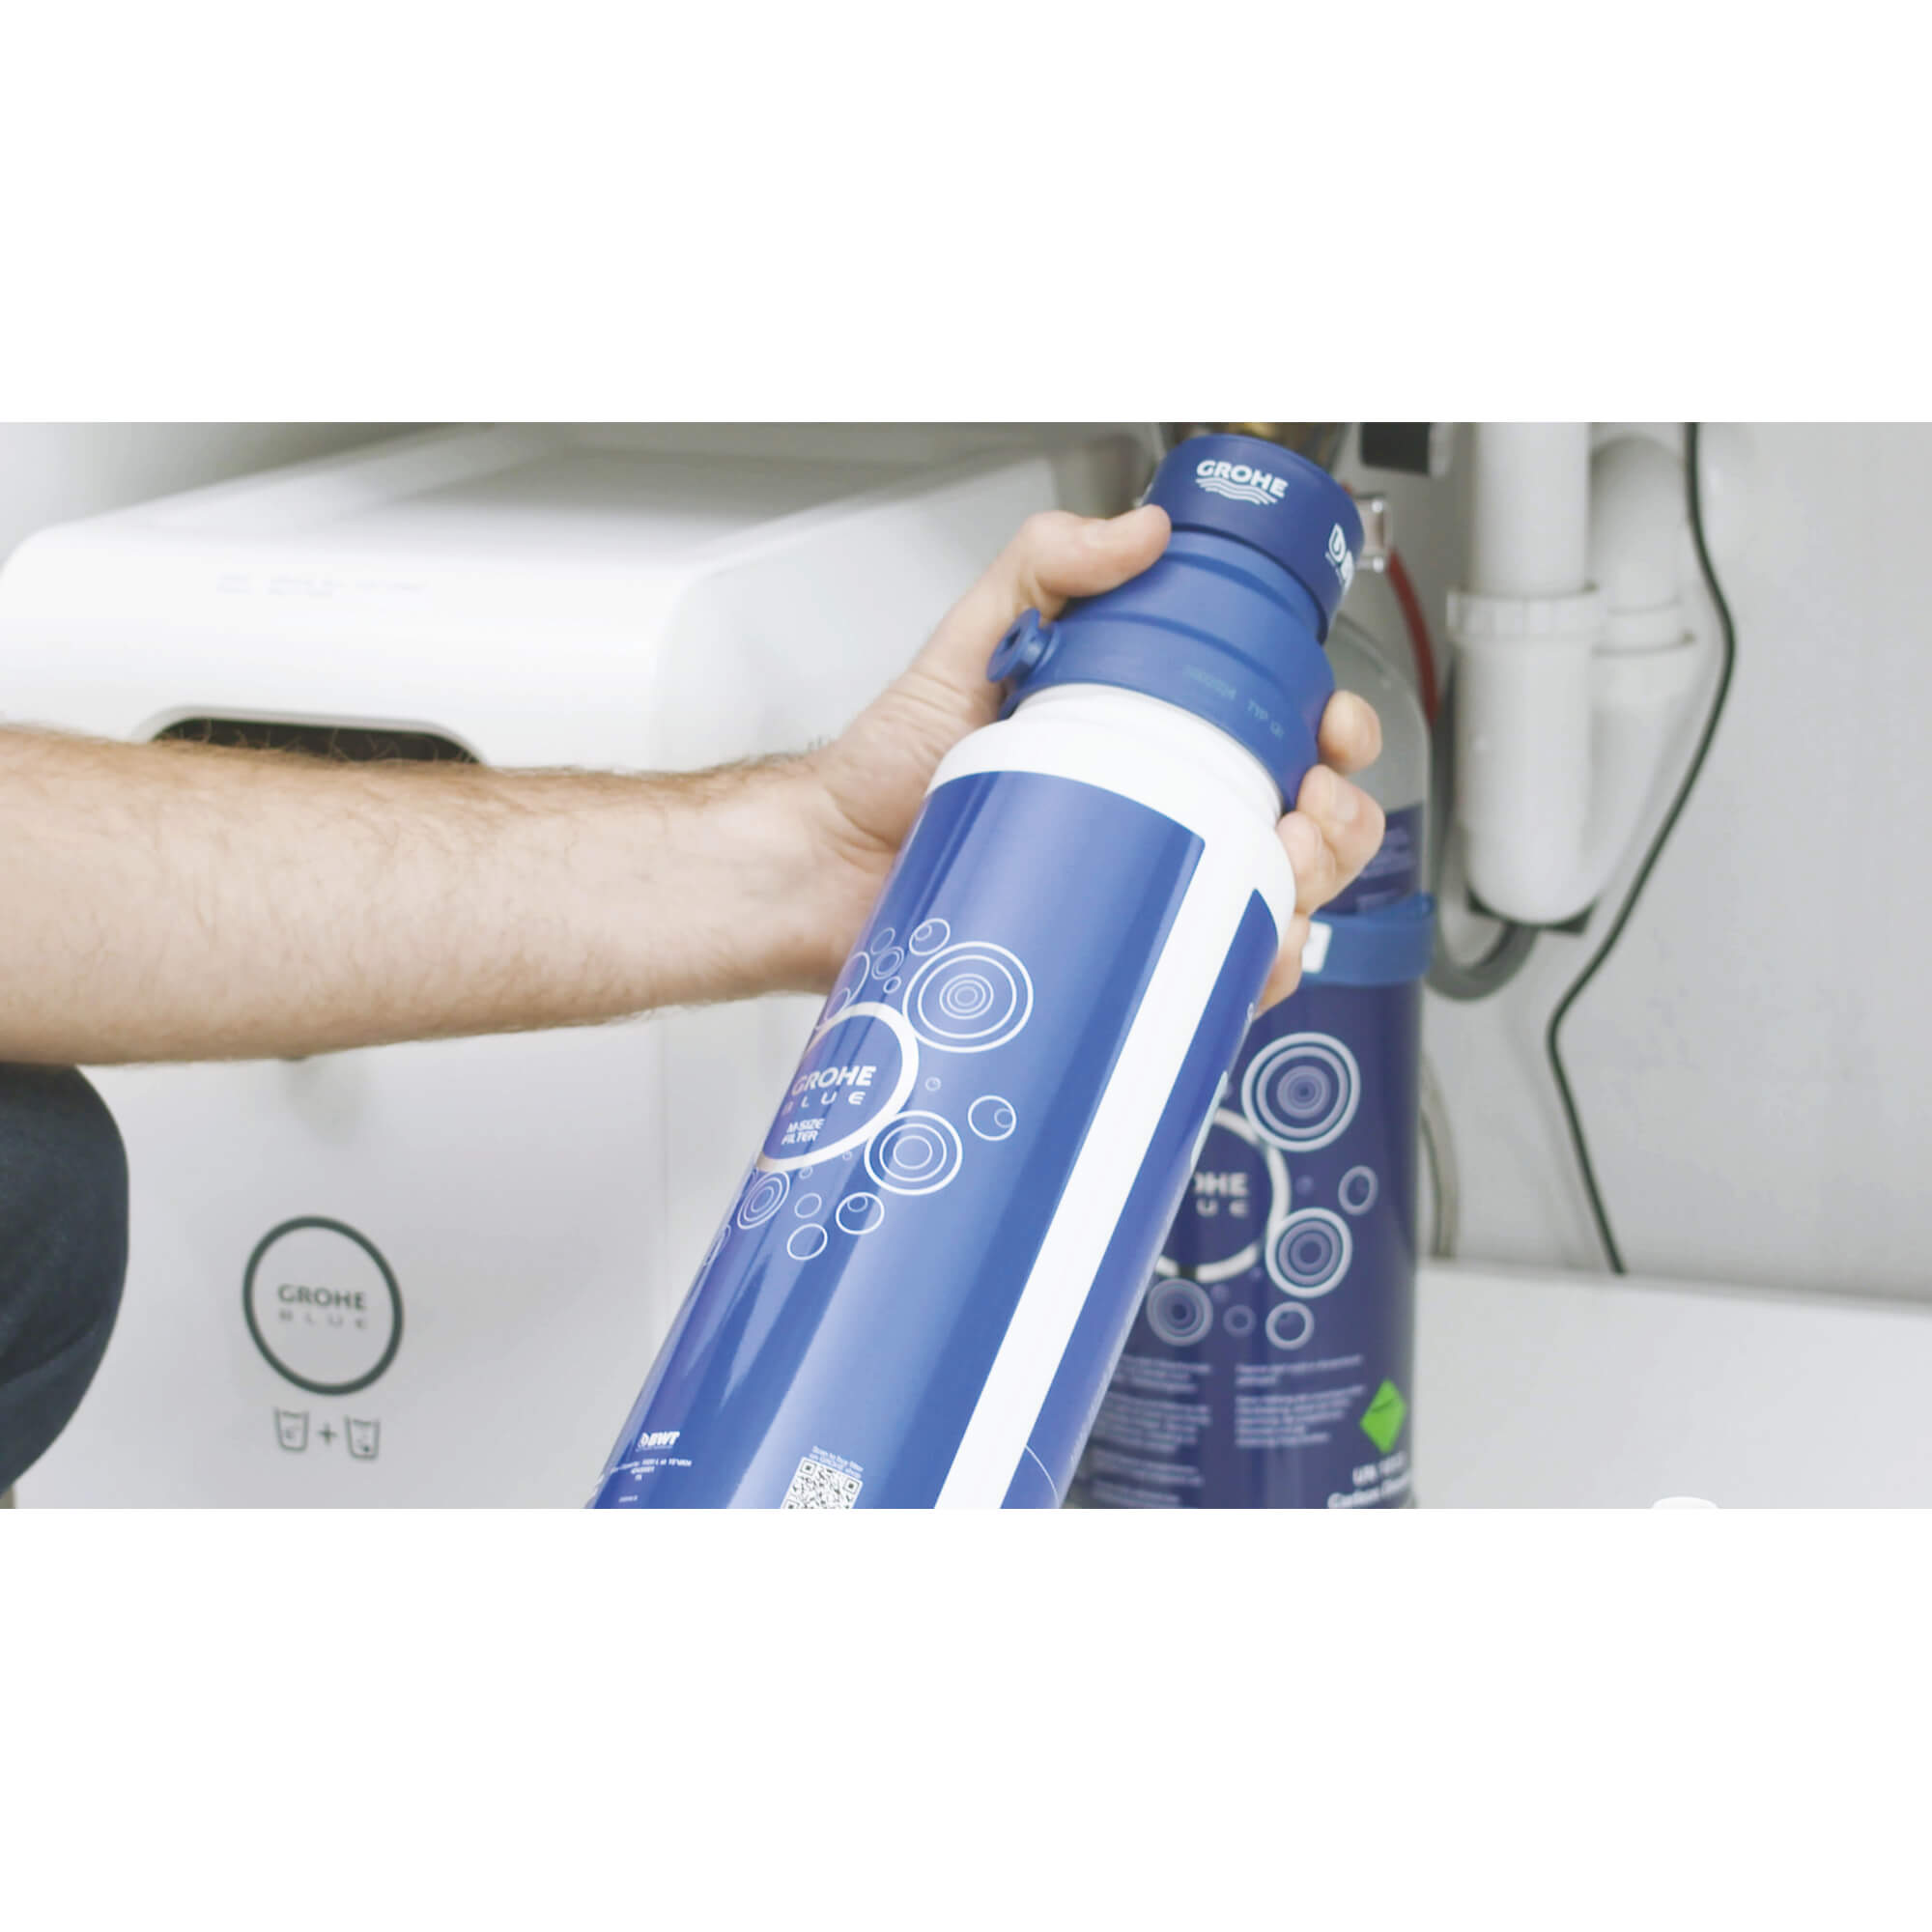 Take-back system for GROHE Blue filters